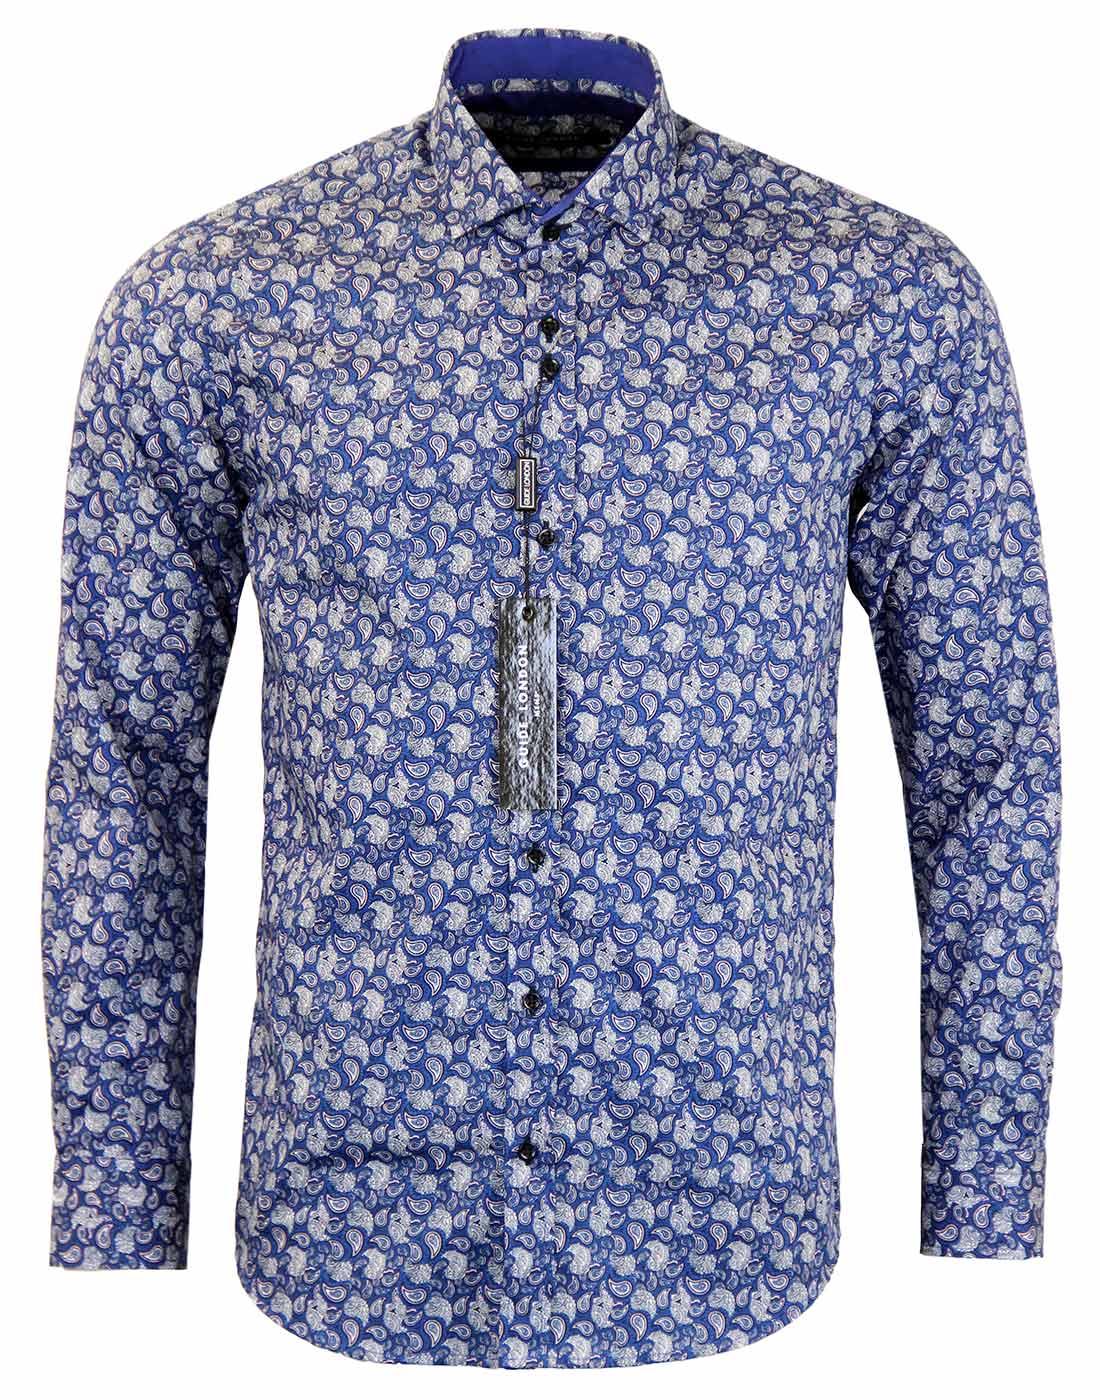 GUIDE LONDON Retro Mod Psychedelic Paisley Shirt in Navy